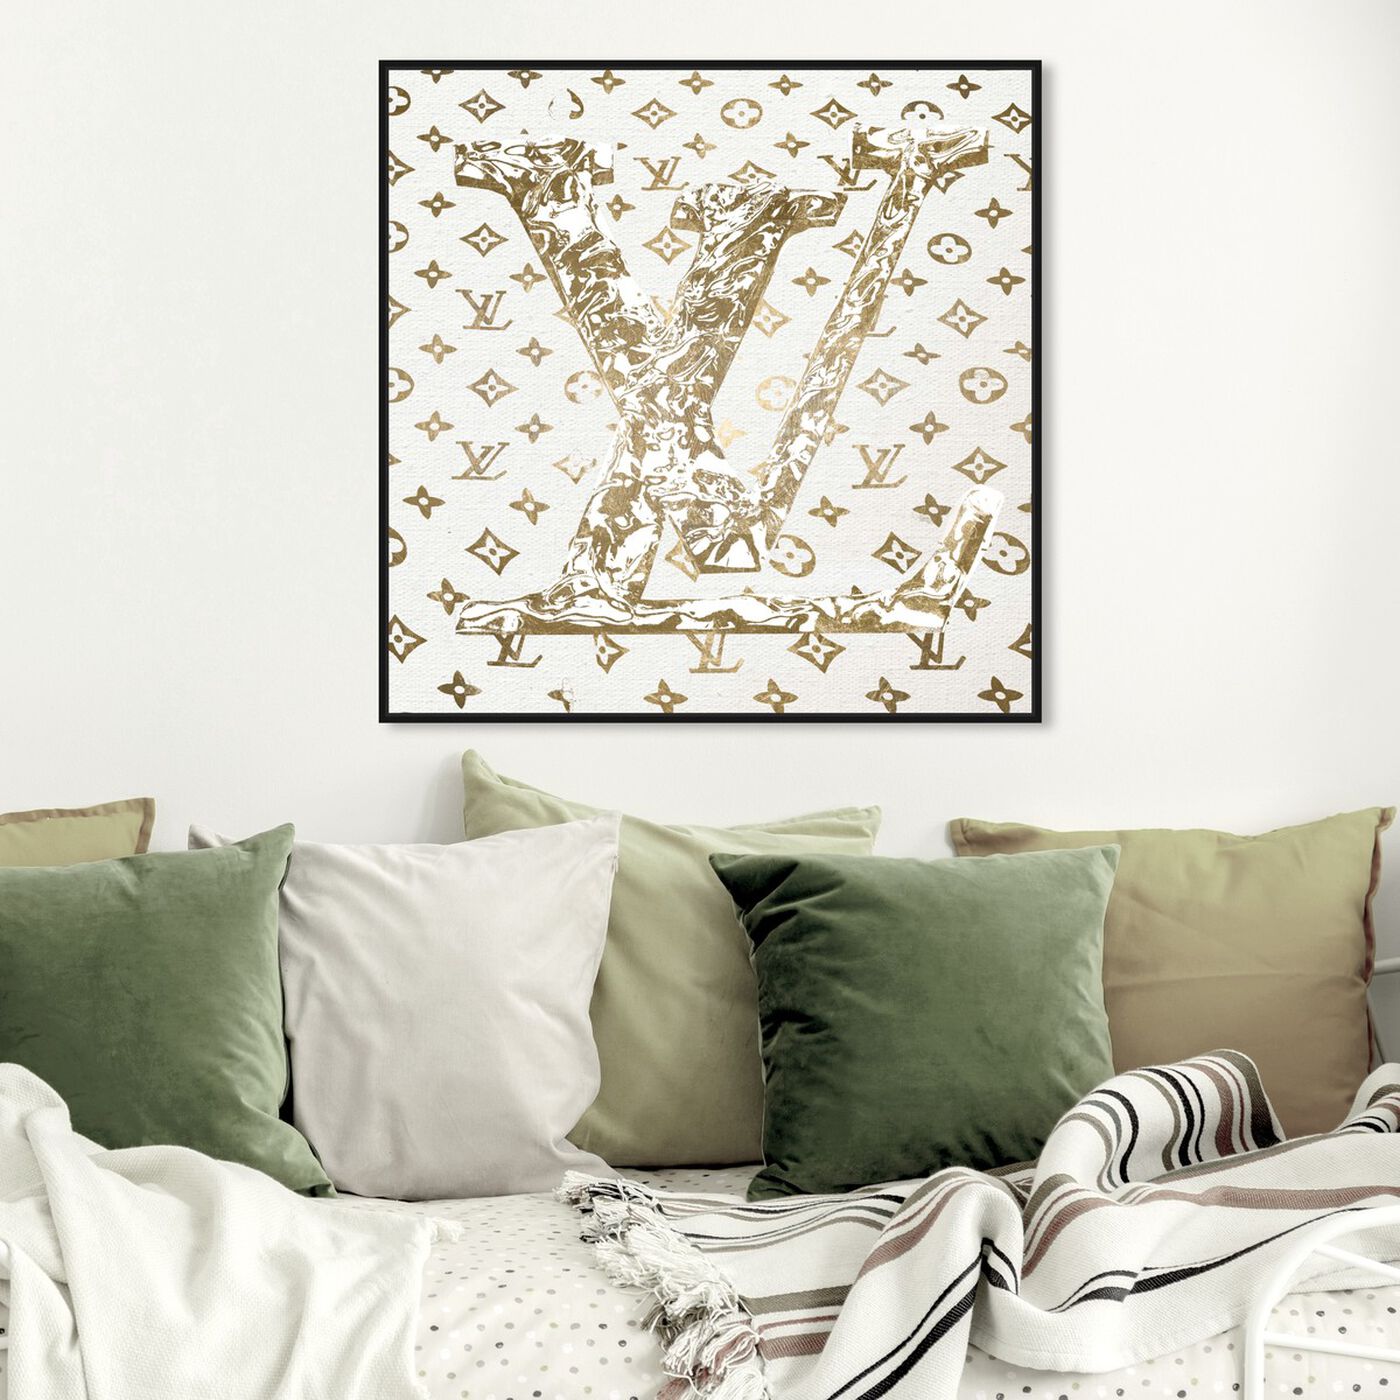 Hanging view of Paris Statement In Style featuring fashion and glam and road signs art.